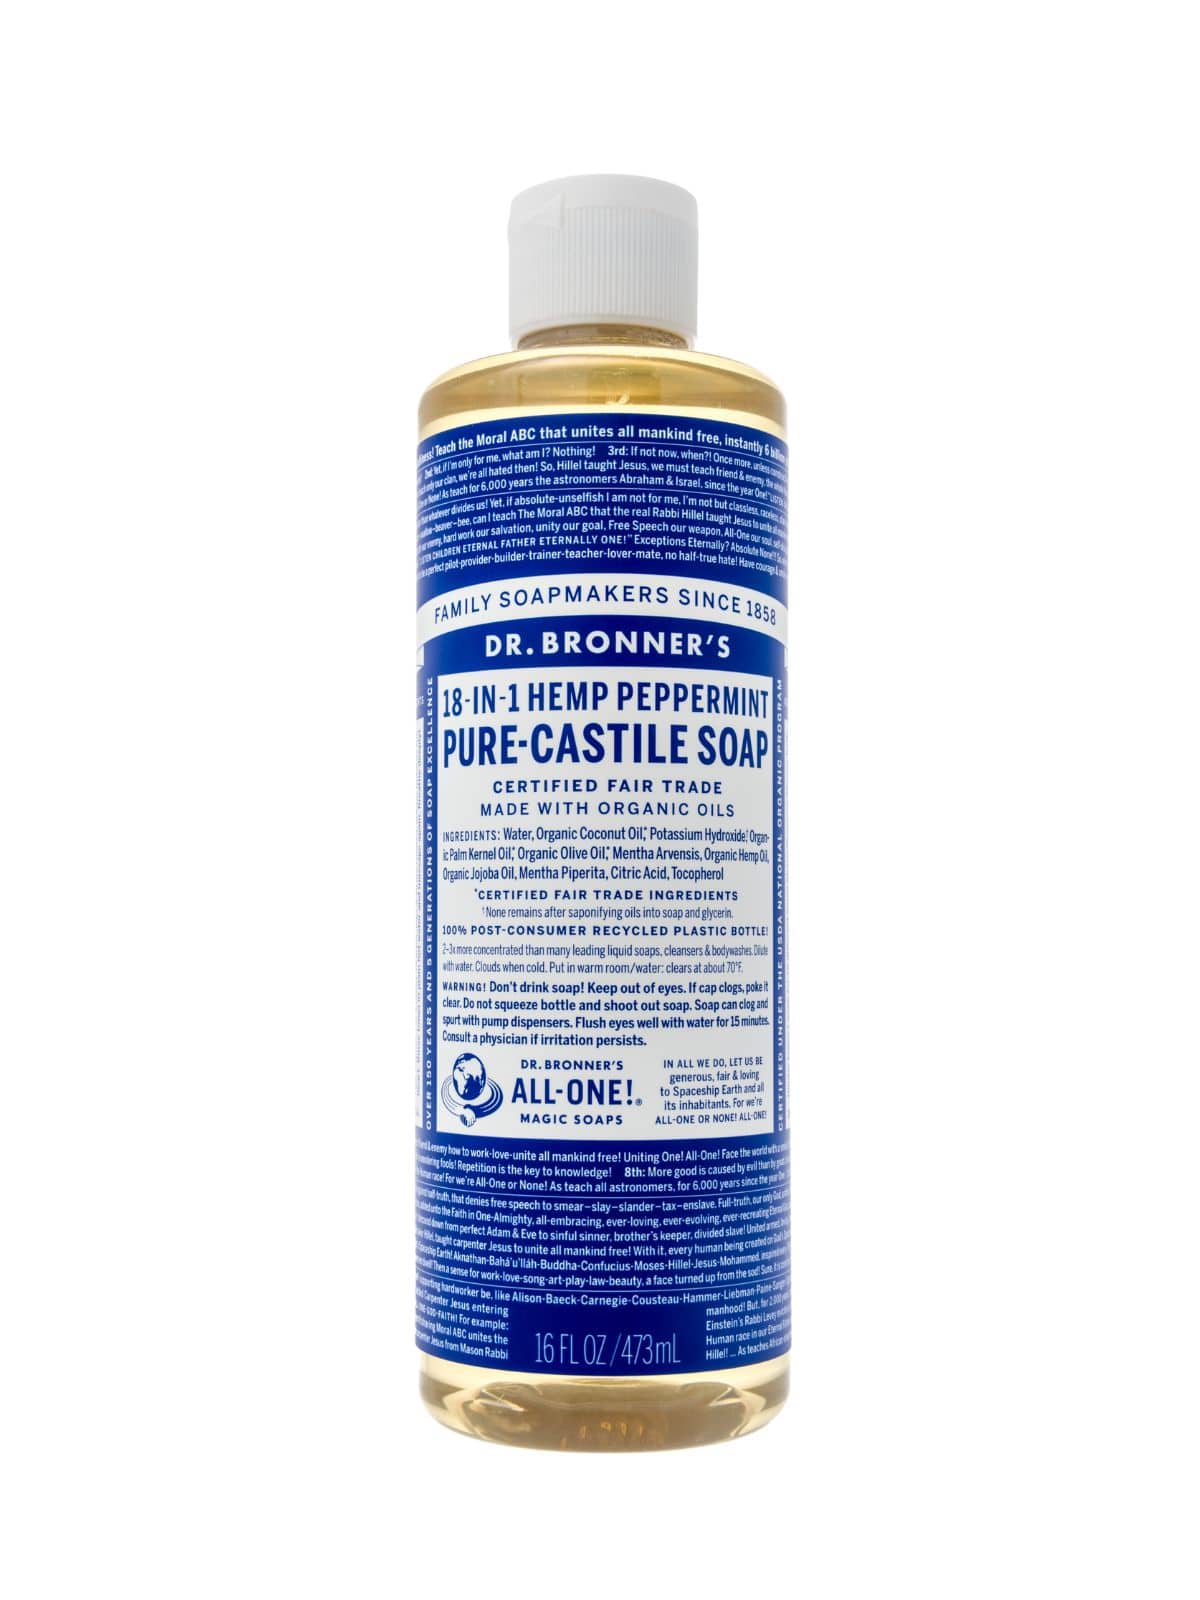 A bottle of pure castile soap on a white background, perfect for cleaning retainers.